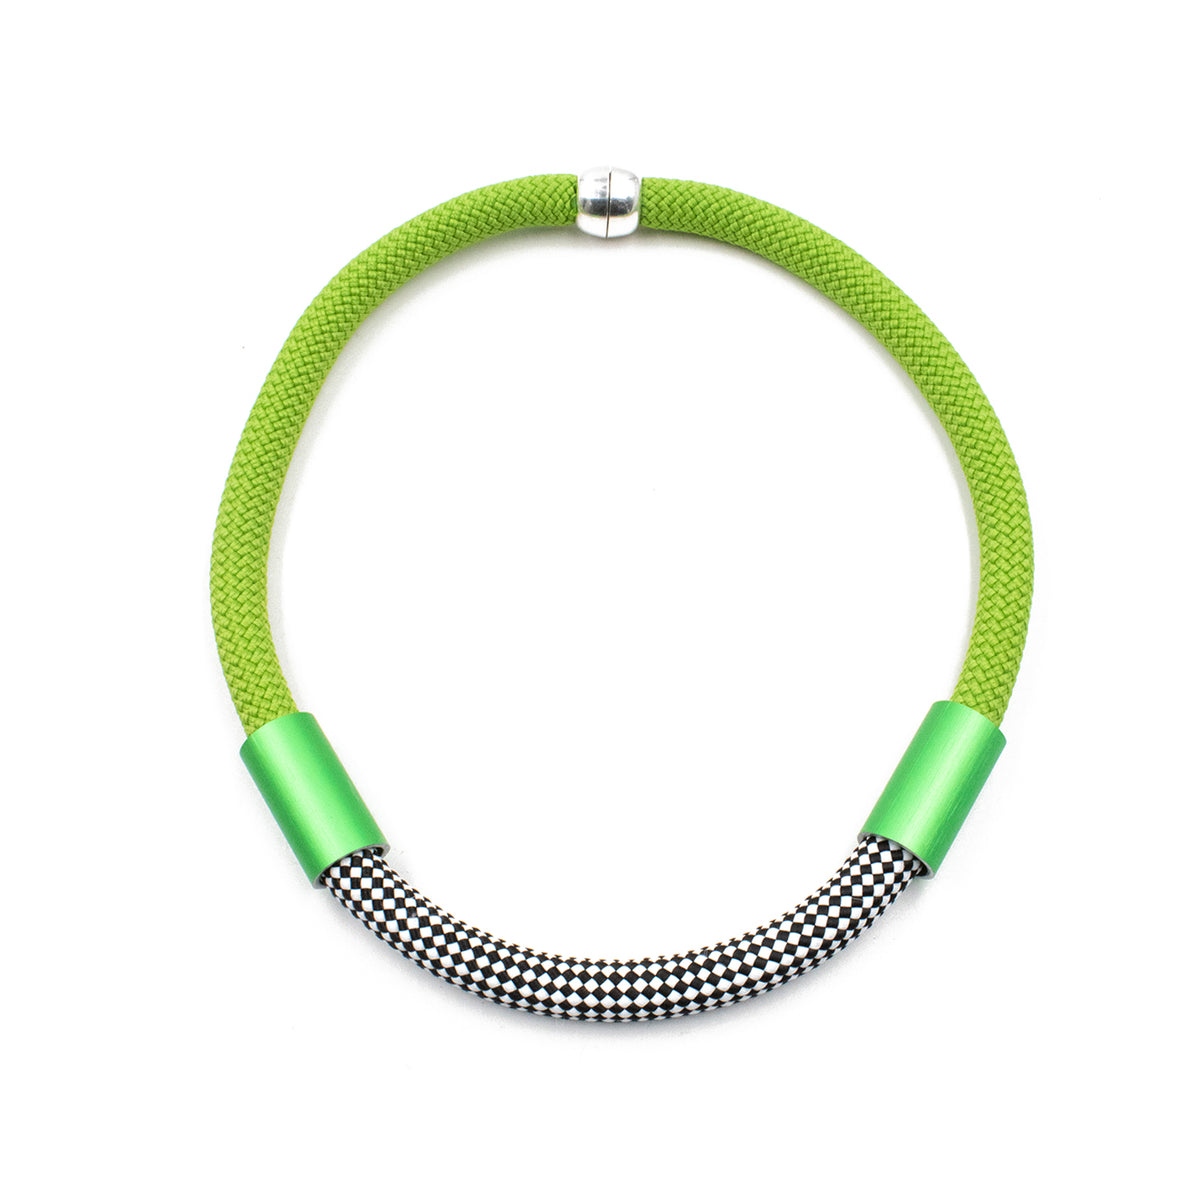 CB64 - Tube Rope Necklace in Limemix